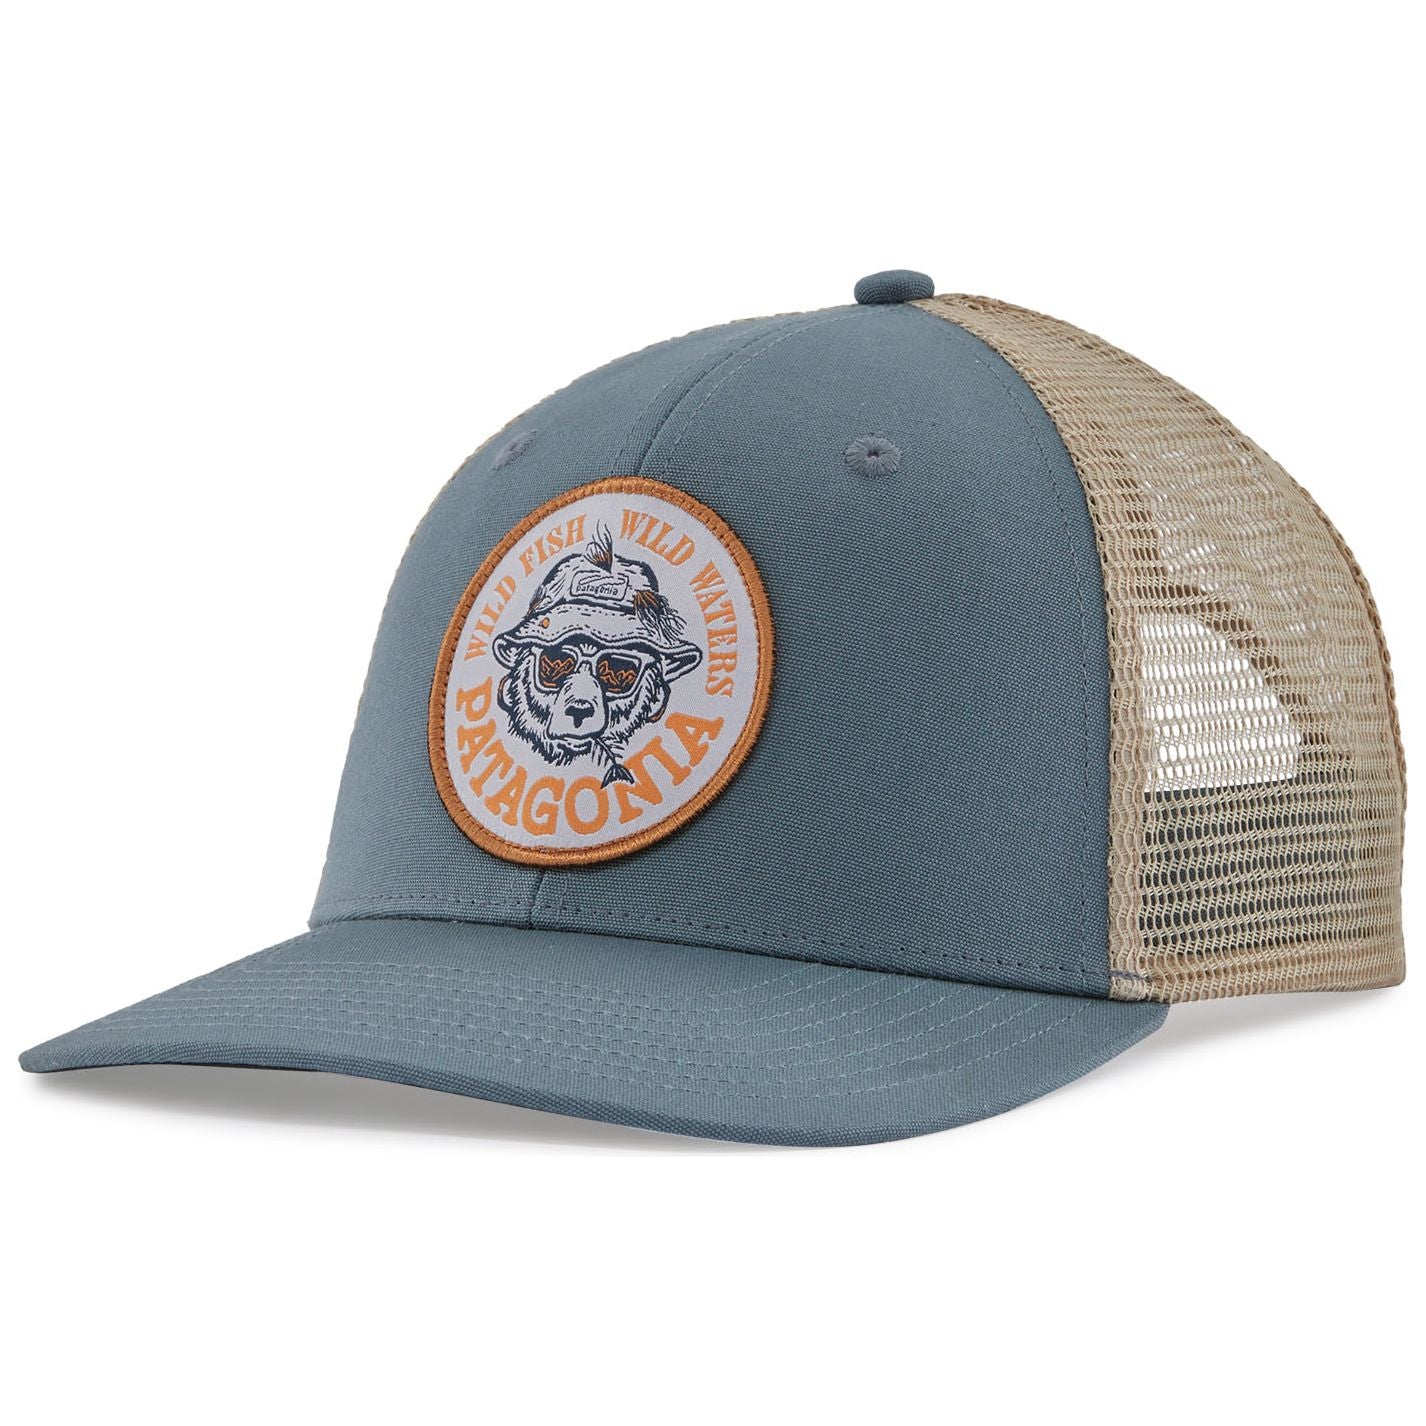 Patagonia Take a Stand Trucker Hat Wild Grizz: Plume Grey Image 01